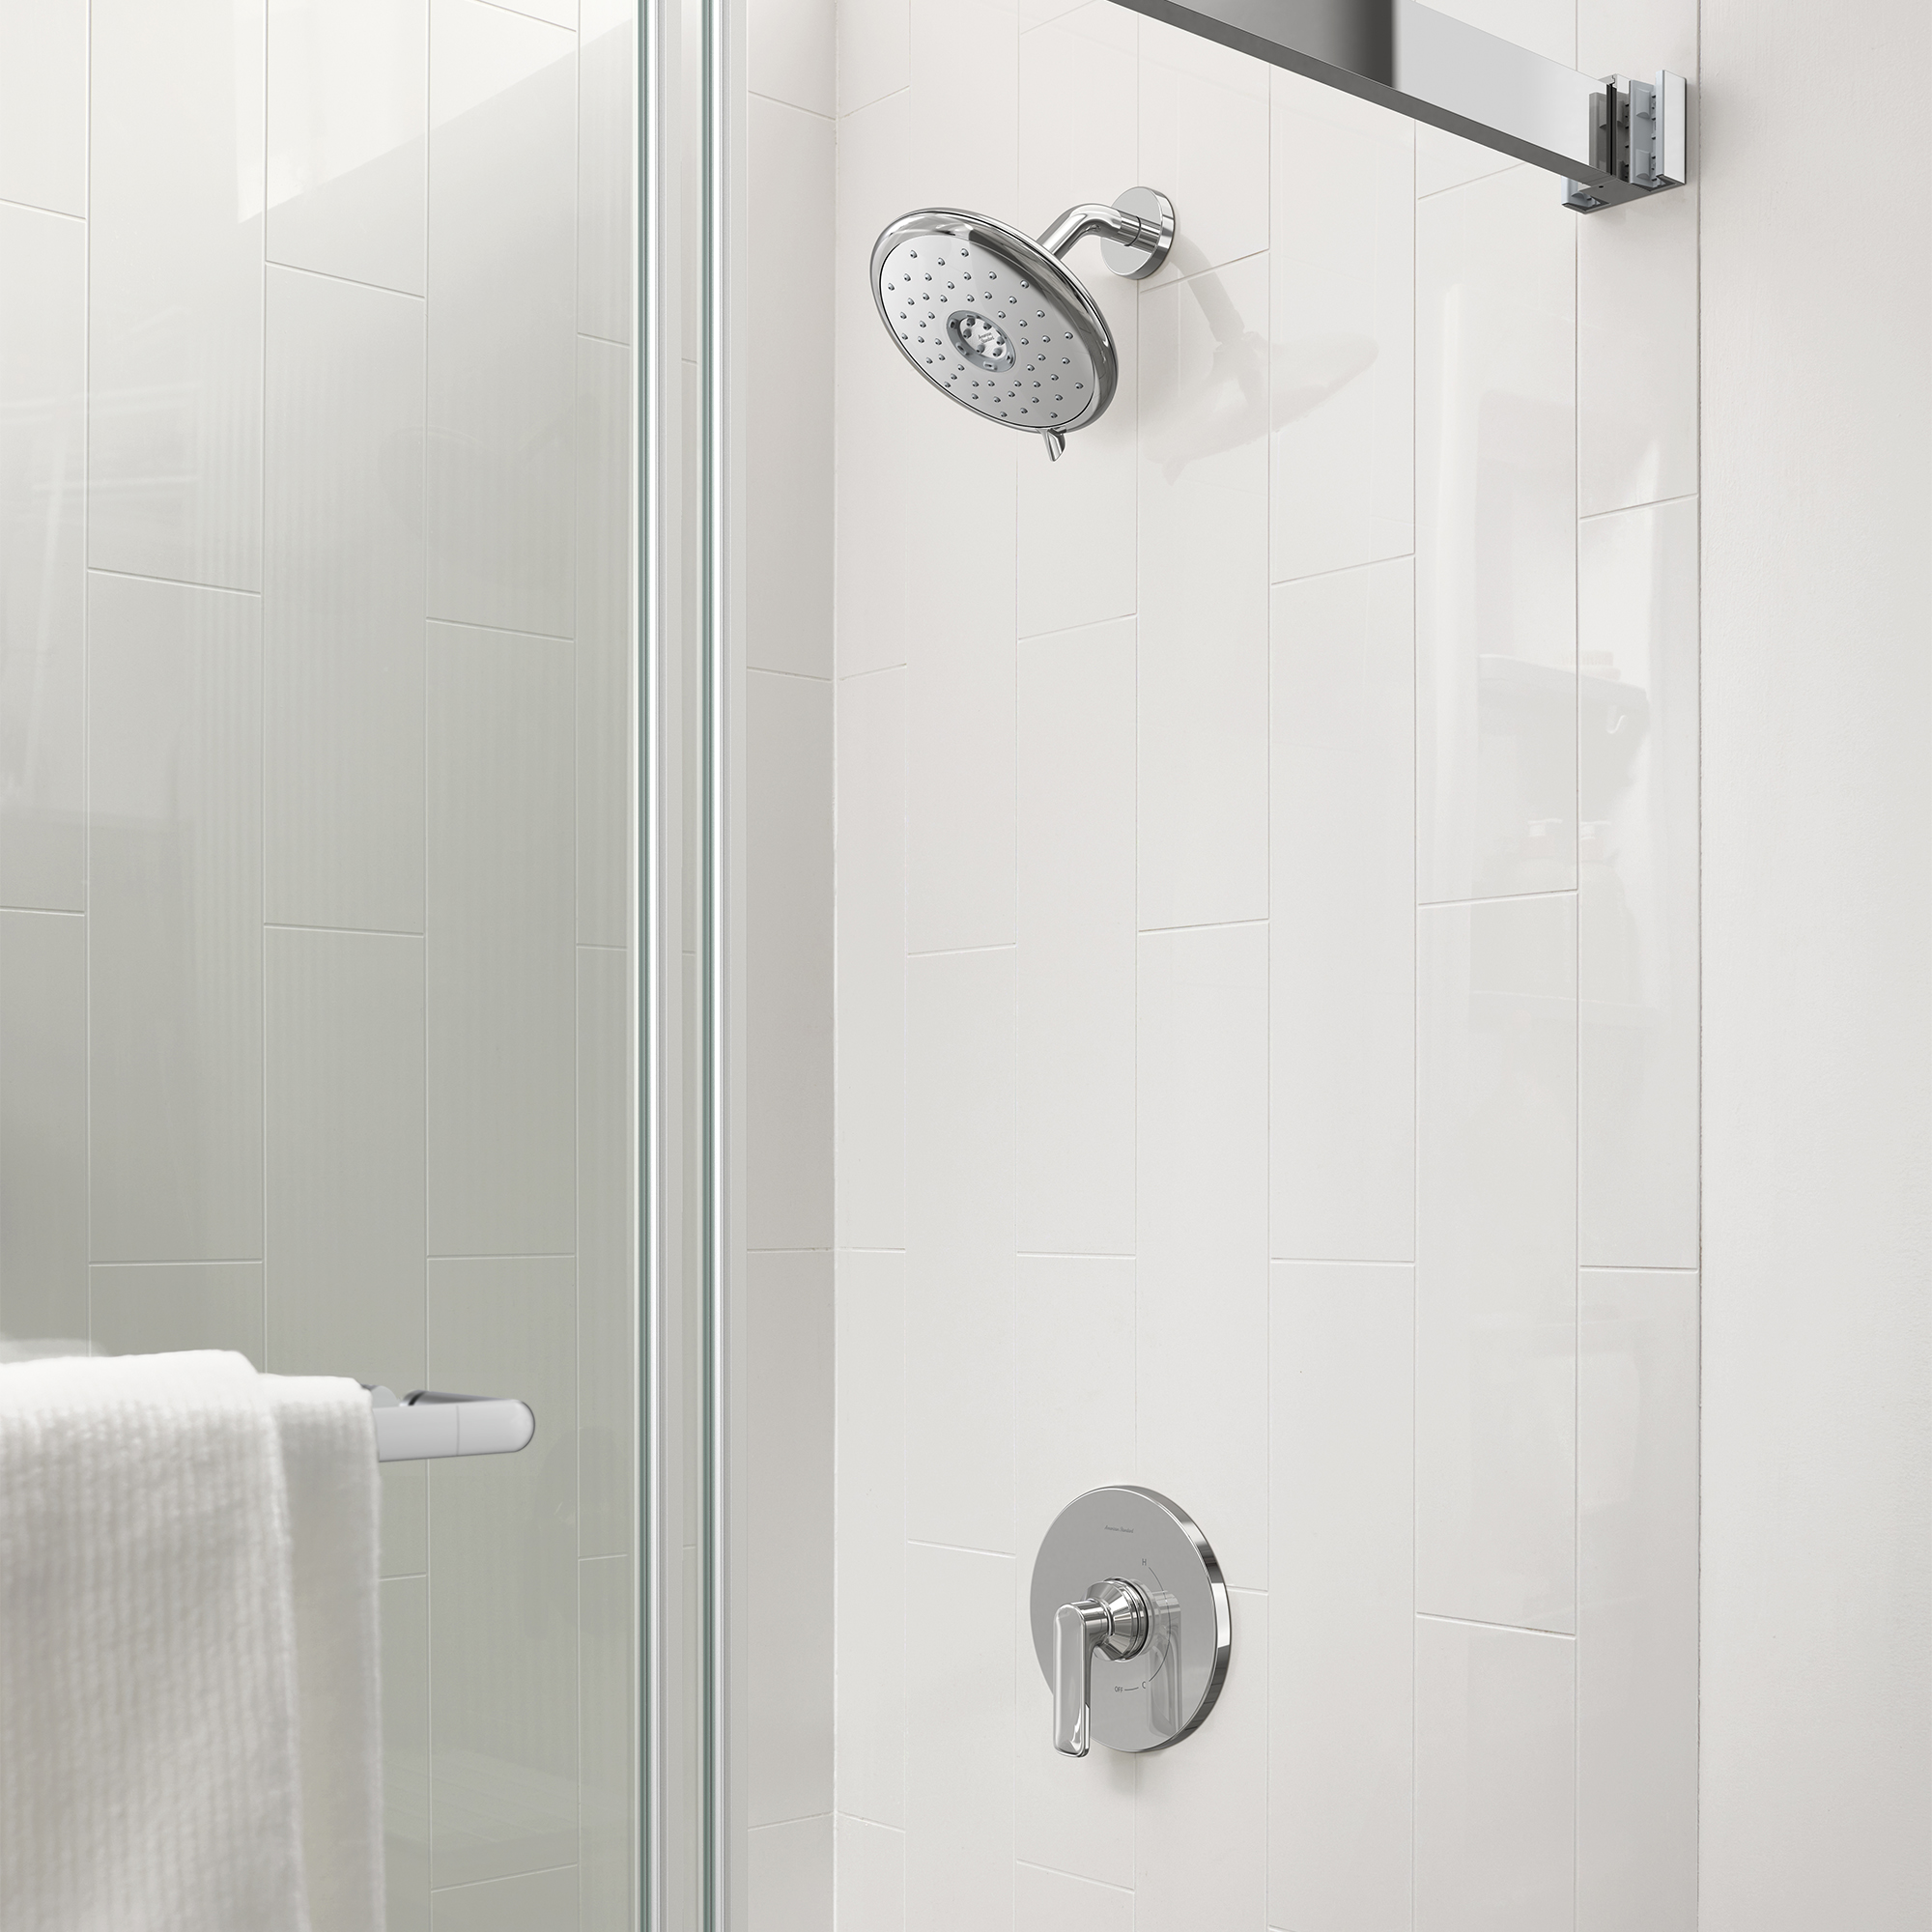 Aspirations™ 1.8 gpm/6.8 L/min Tub and Shower Trim Kit With Water-Saving Showerhead and Double Ceramic Pressure Balance Cartridge With Lever Handle